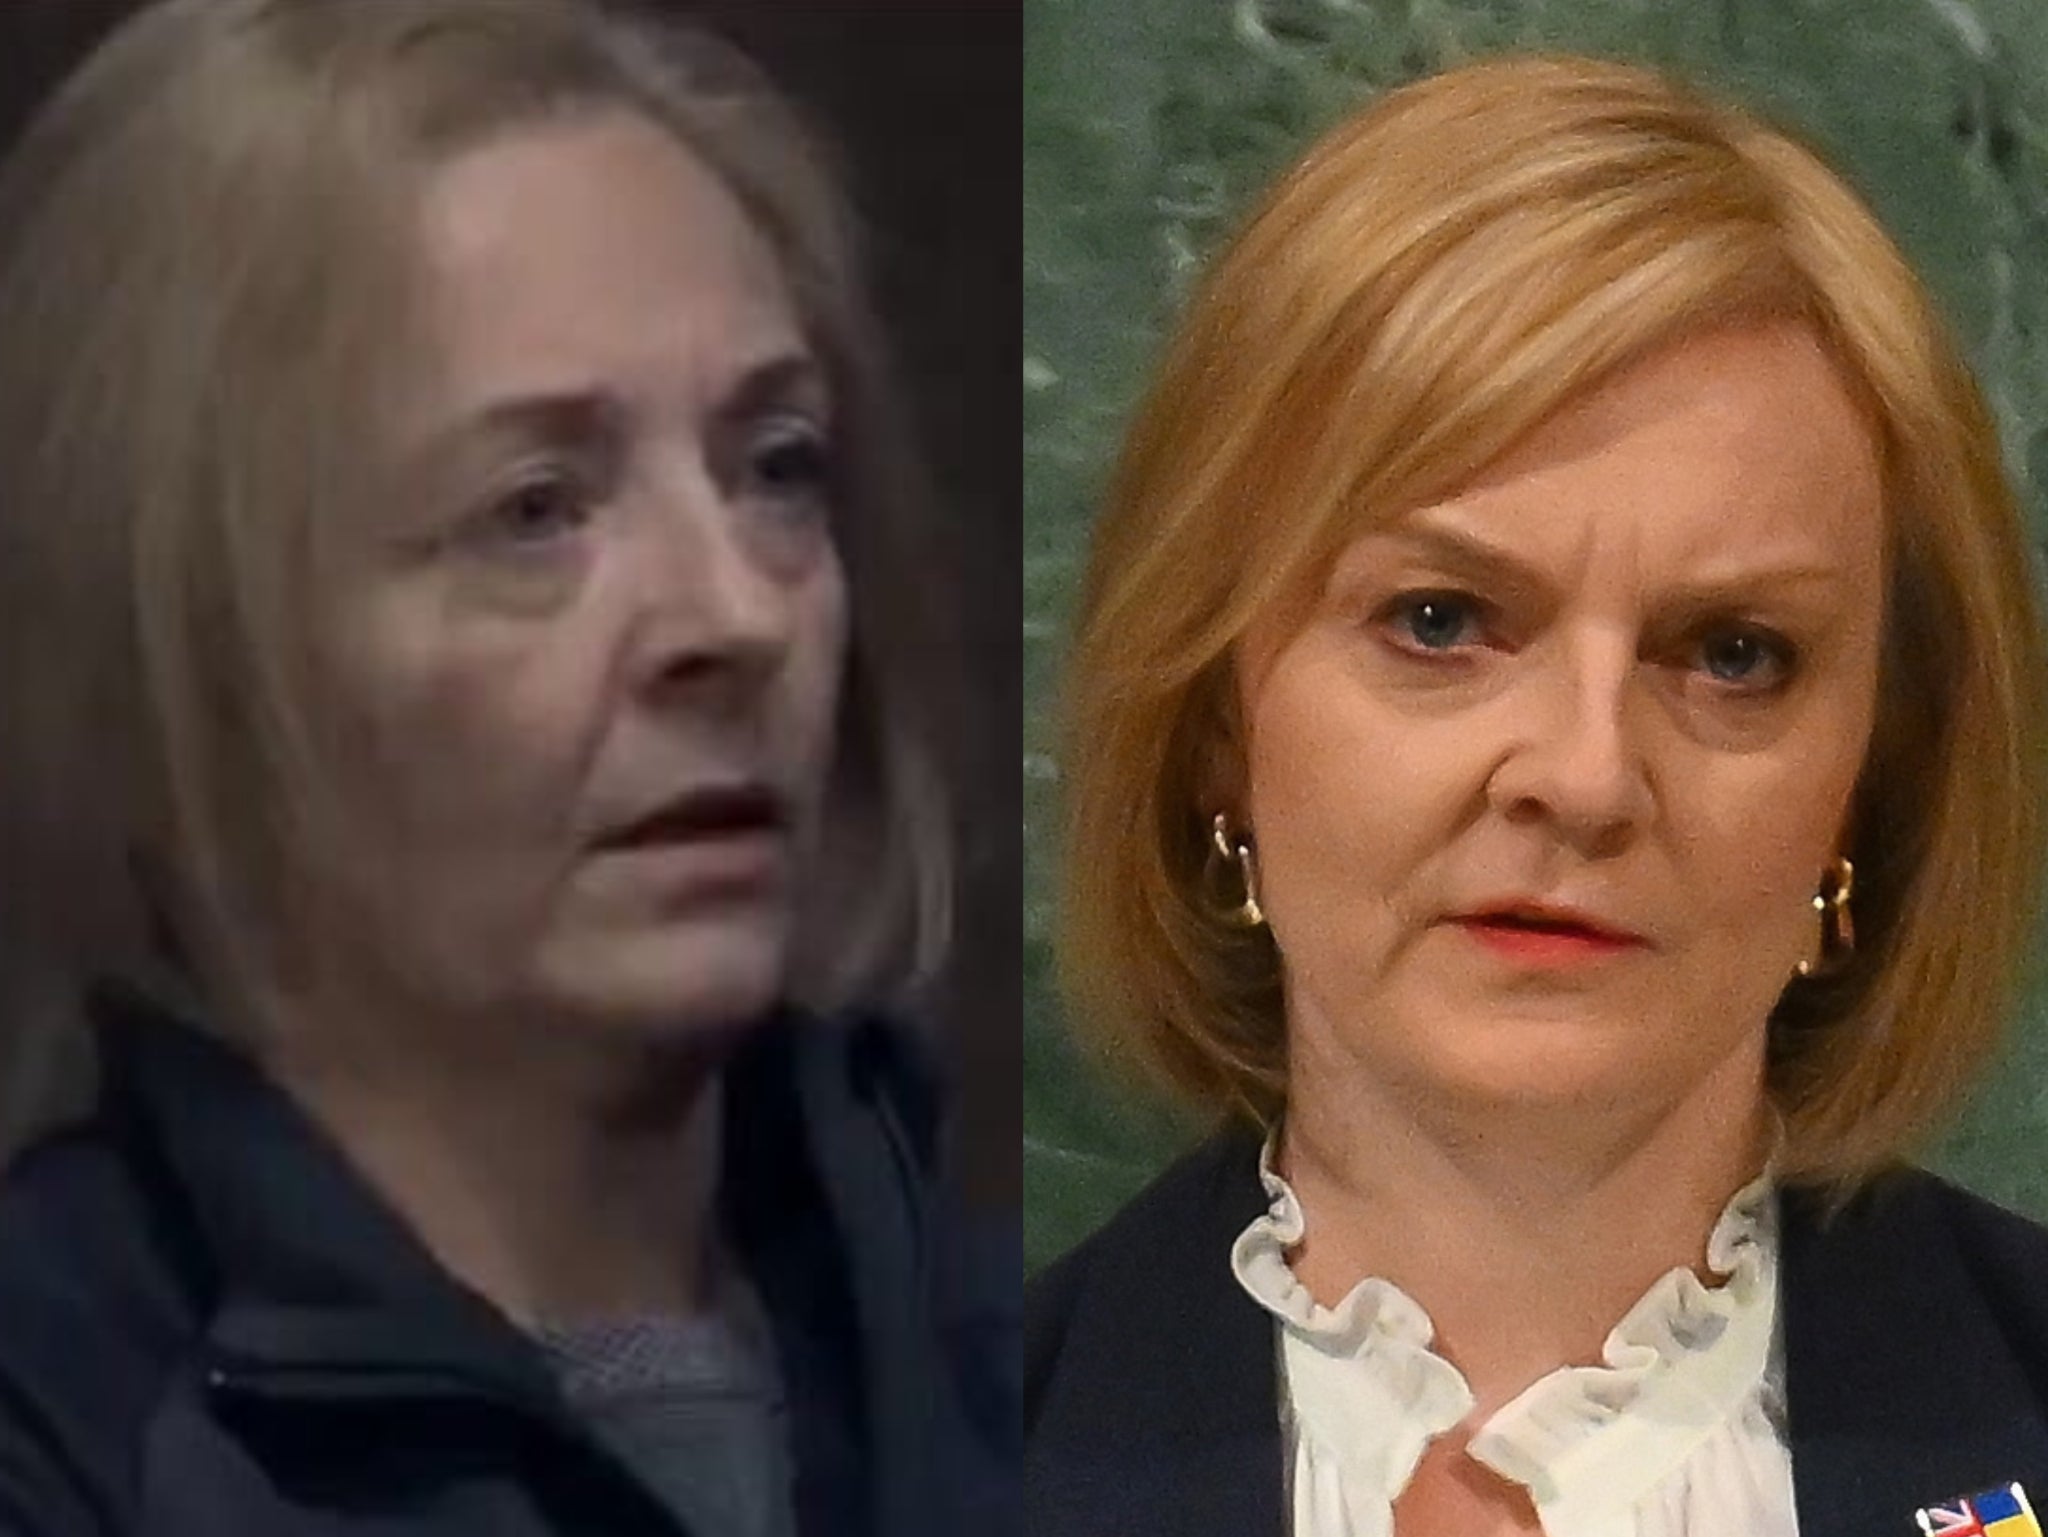 Liz Truss (right) and the ‘lookalike’ identified by viewers of ‘Celebrity SAS: Who Dares Wins’ (left)